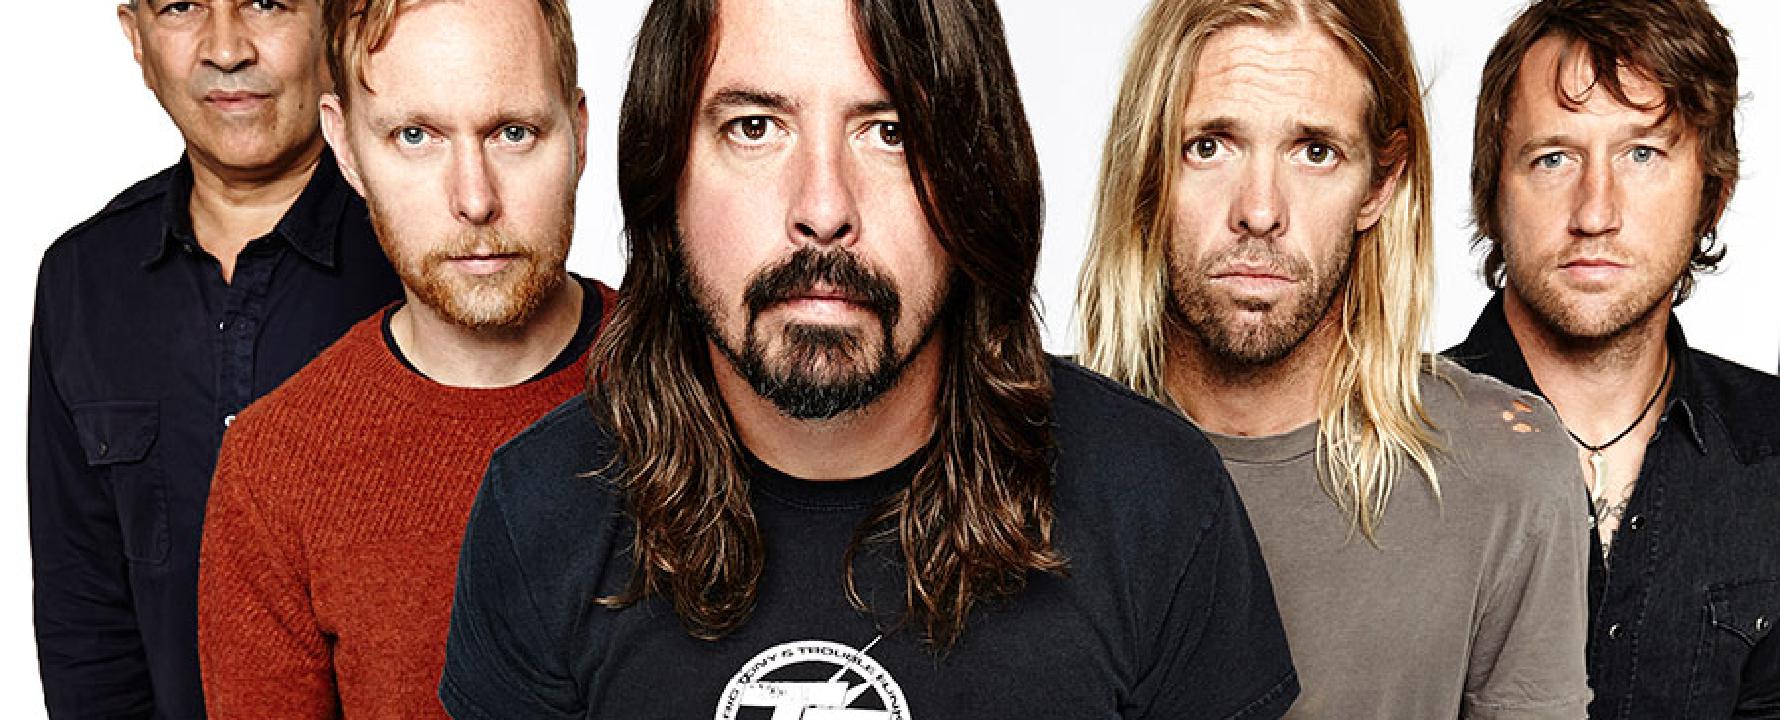 Promotional photograph of Foo Fighters.